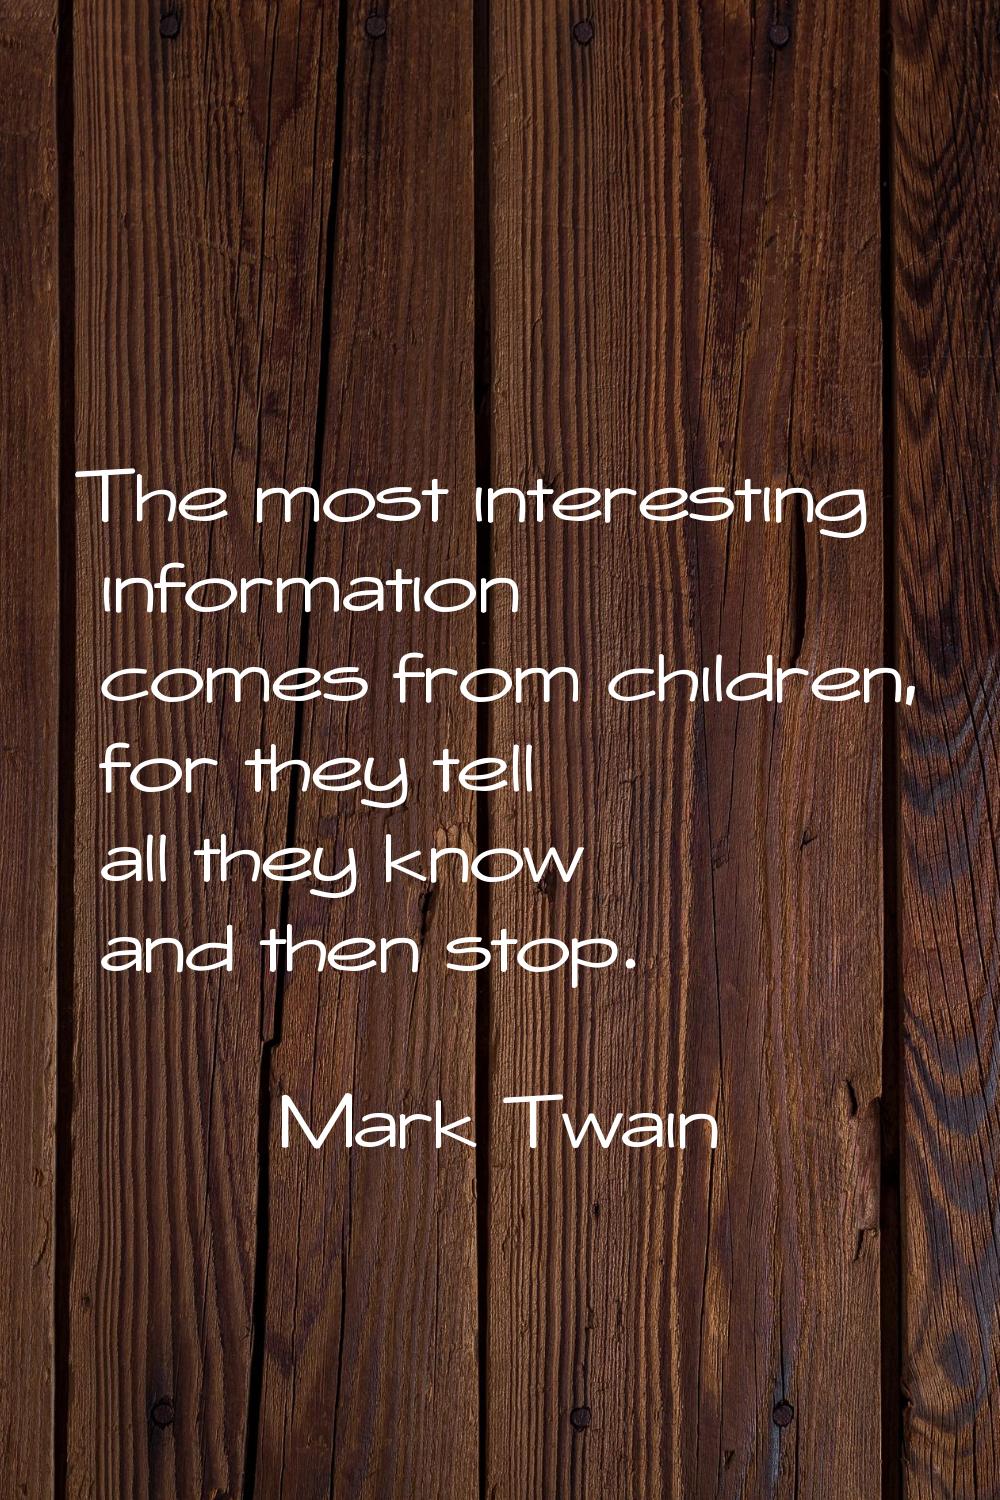 The most interesting information comes from children, for they tell all they know and then stop.